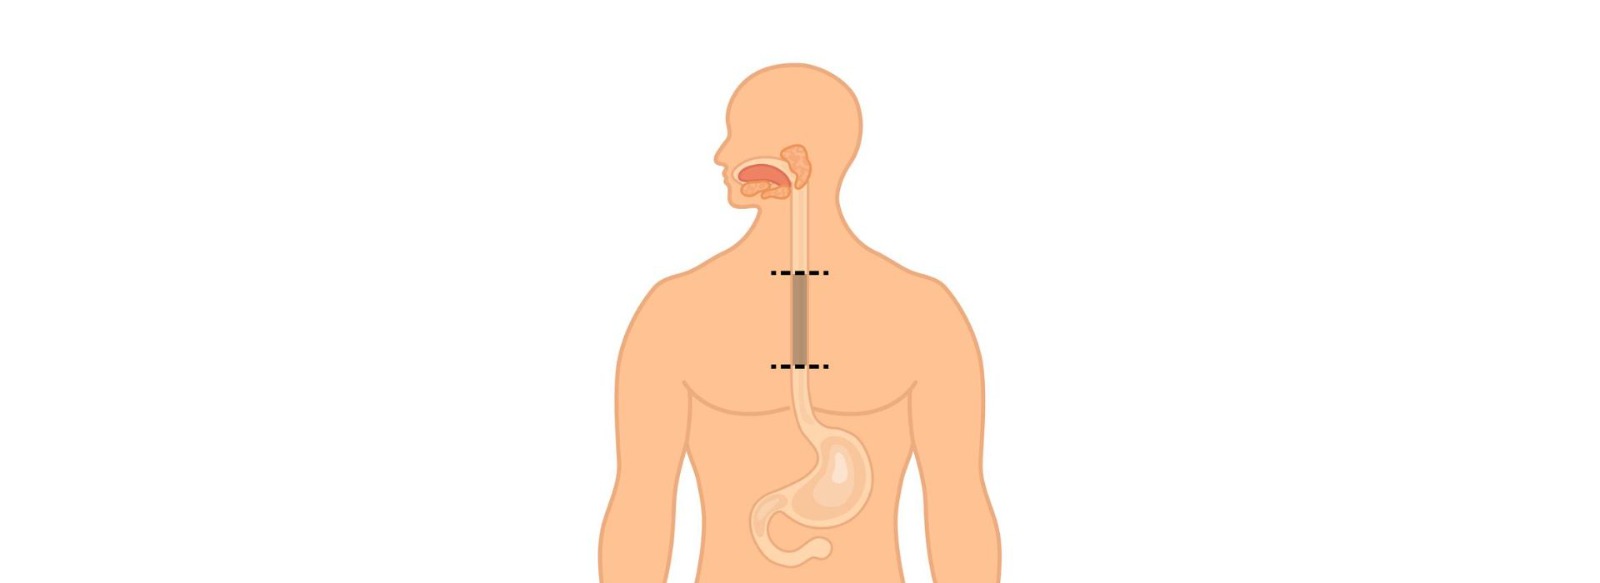 Treatment for esophageal cancer